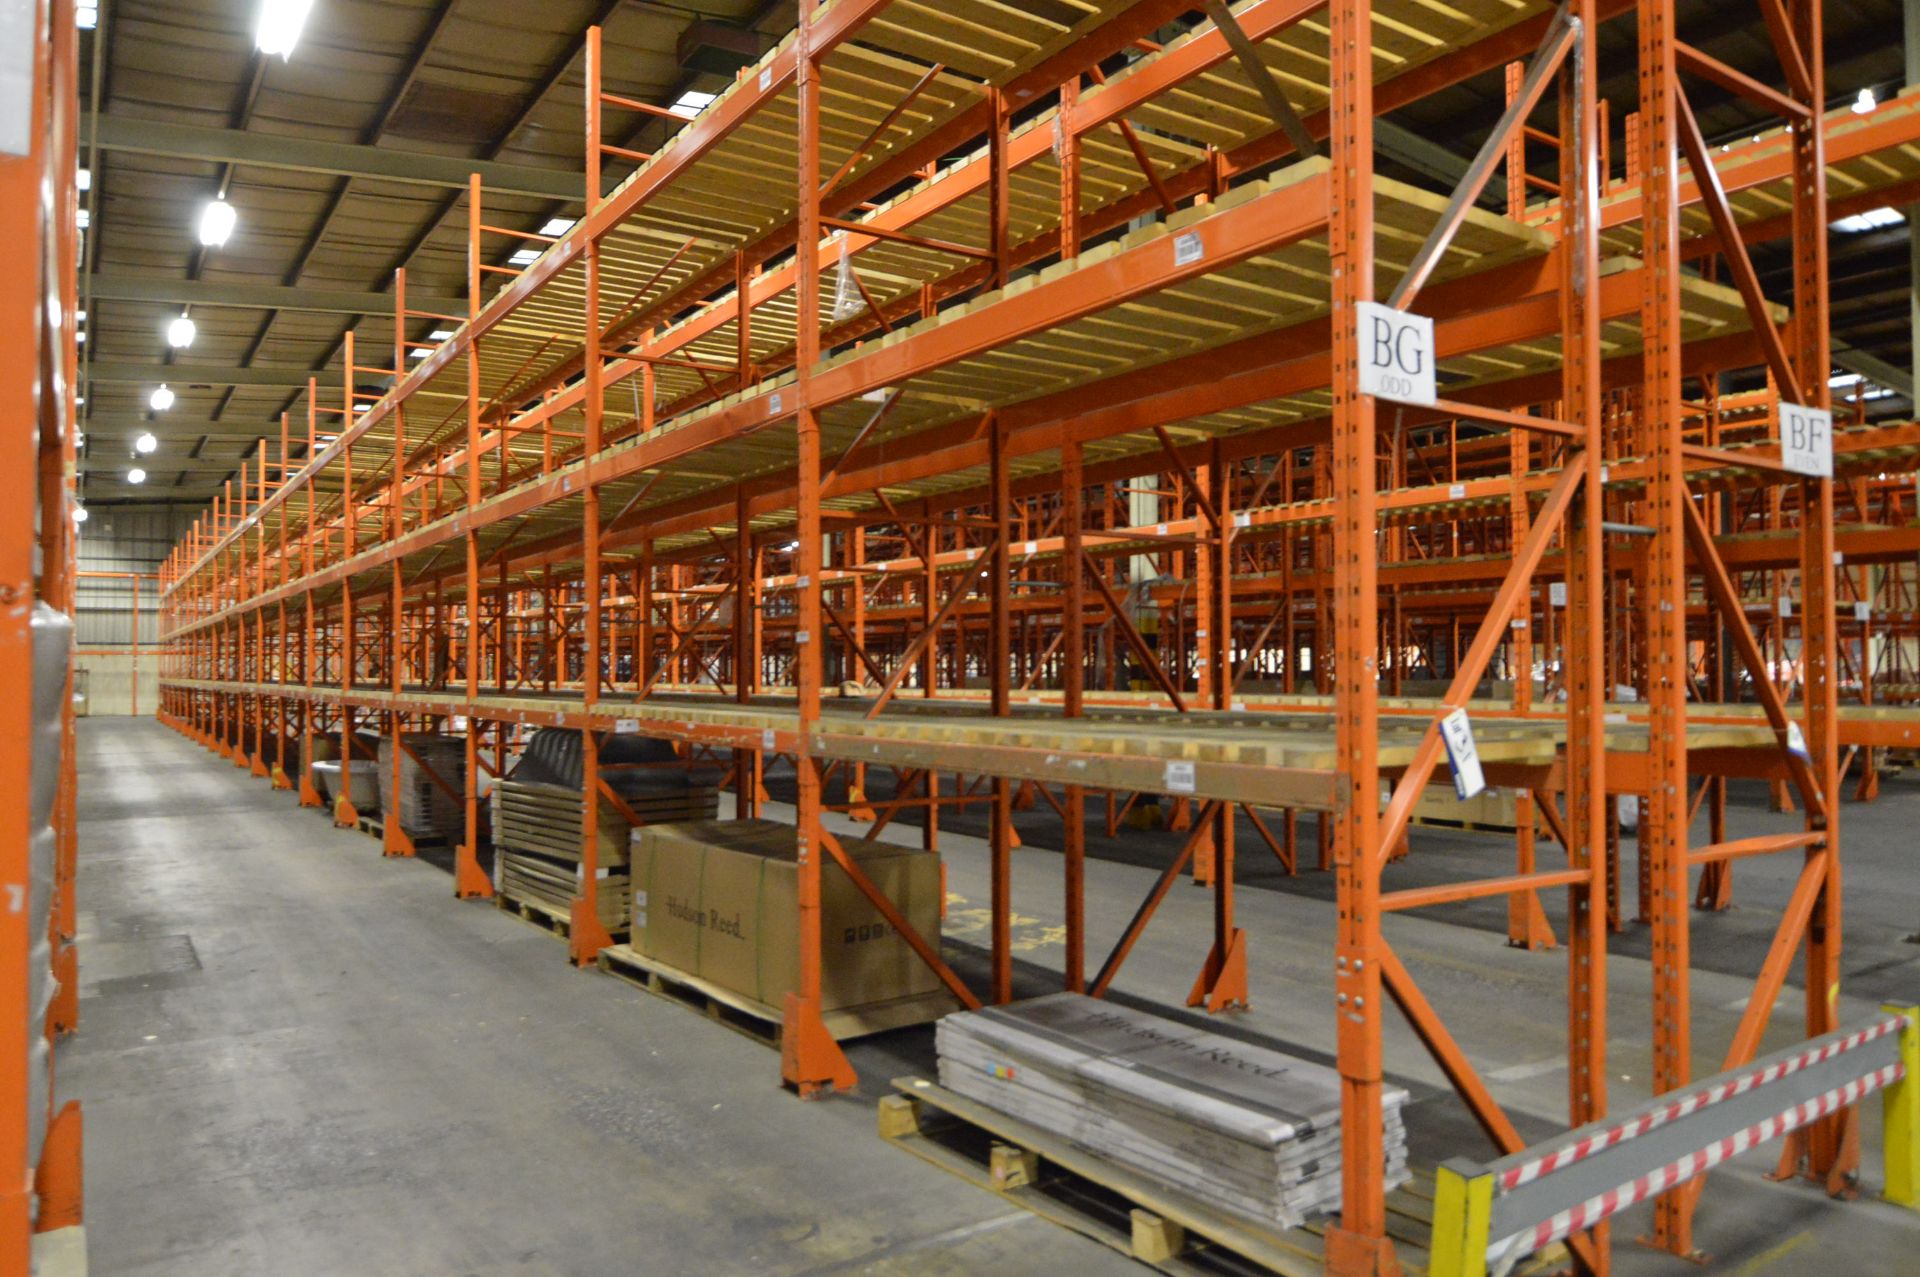 Redirack SD 2.50 DOUBLE SIDED 38 BAY THREE TIER PALLET RACK, each run approx. 52m x 1m x 5.4m - Image 3 of 4